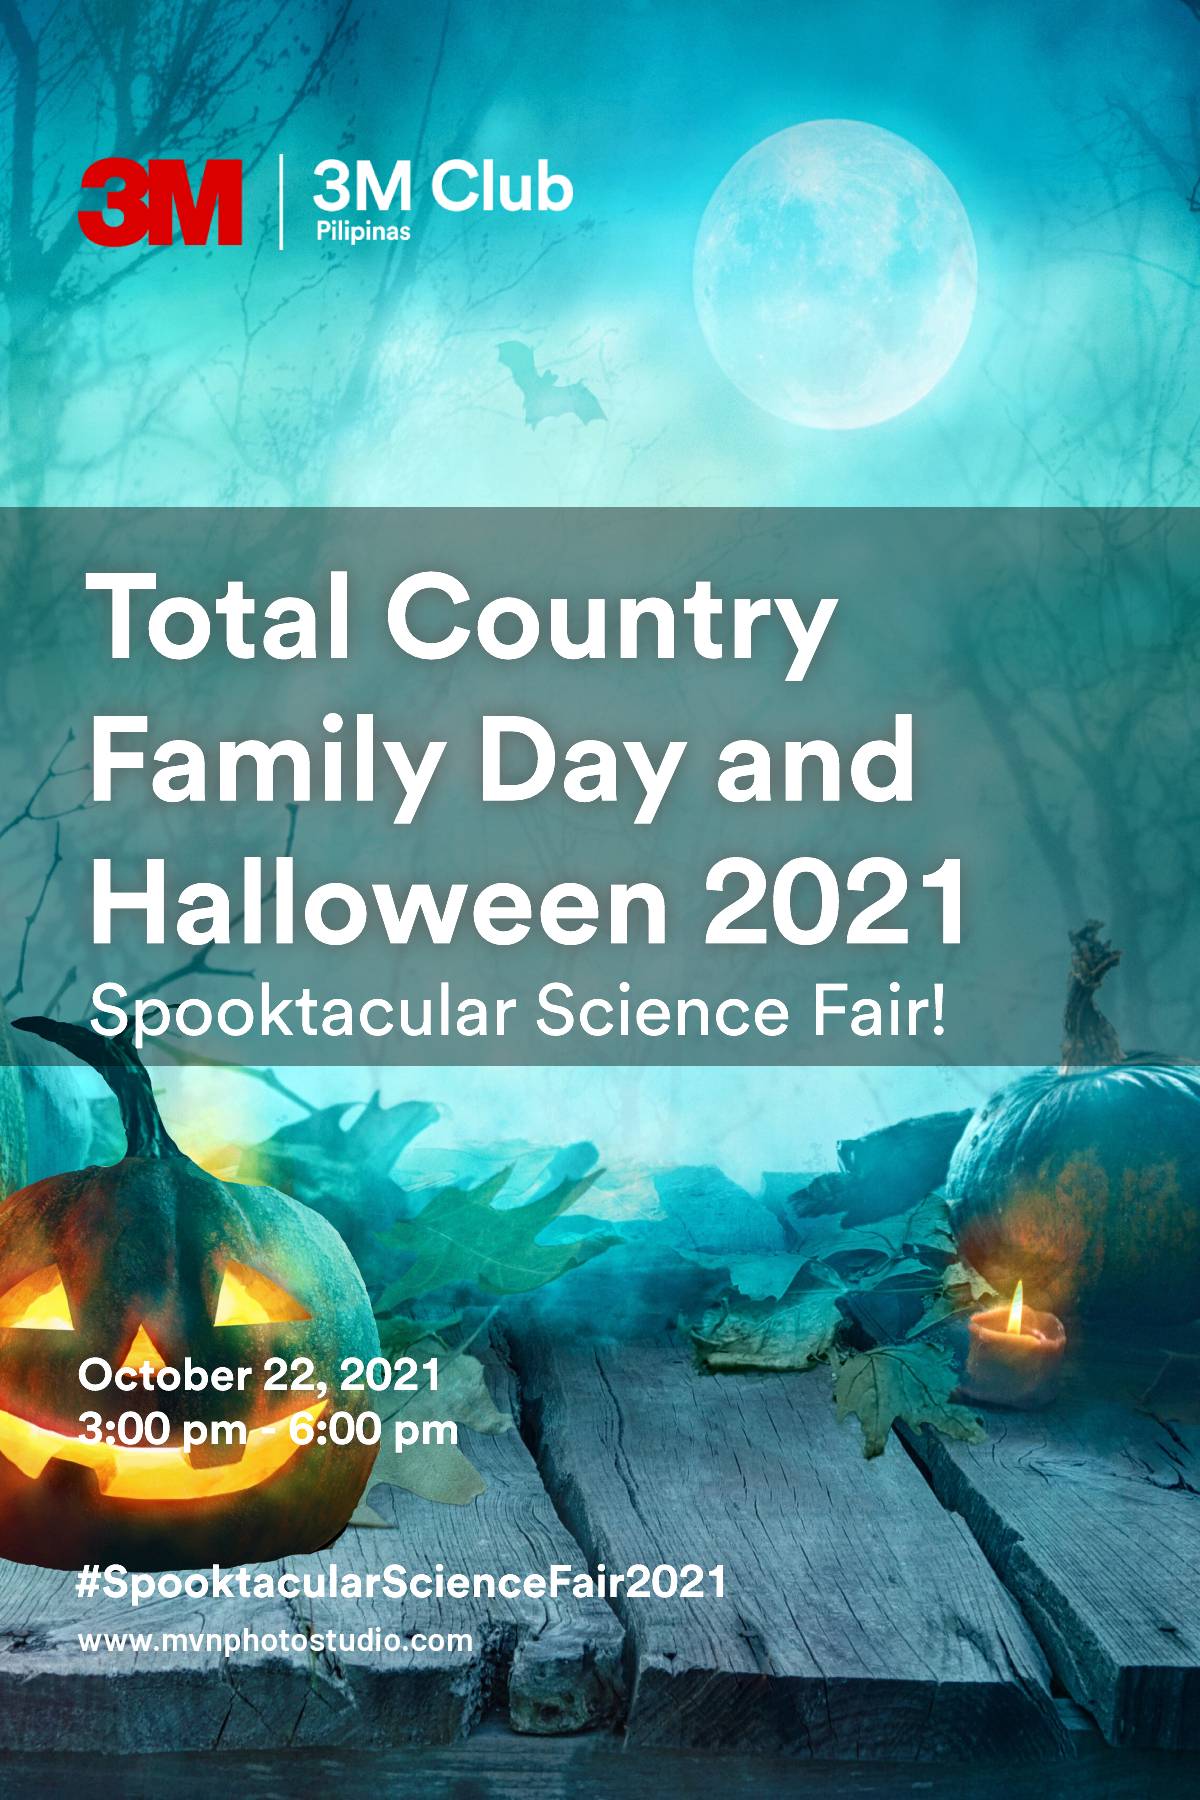 3M Total Country Family Day and Halloween 2021